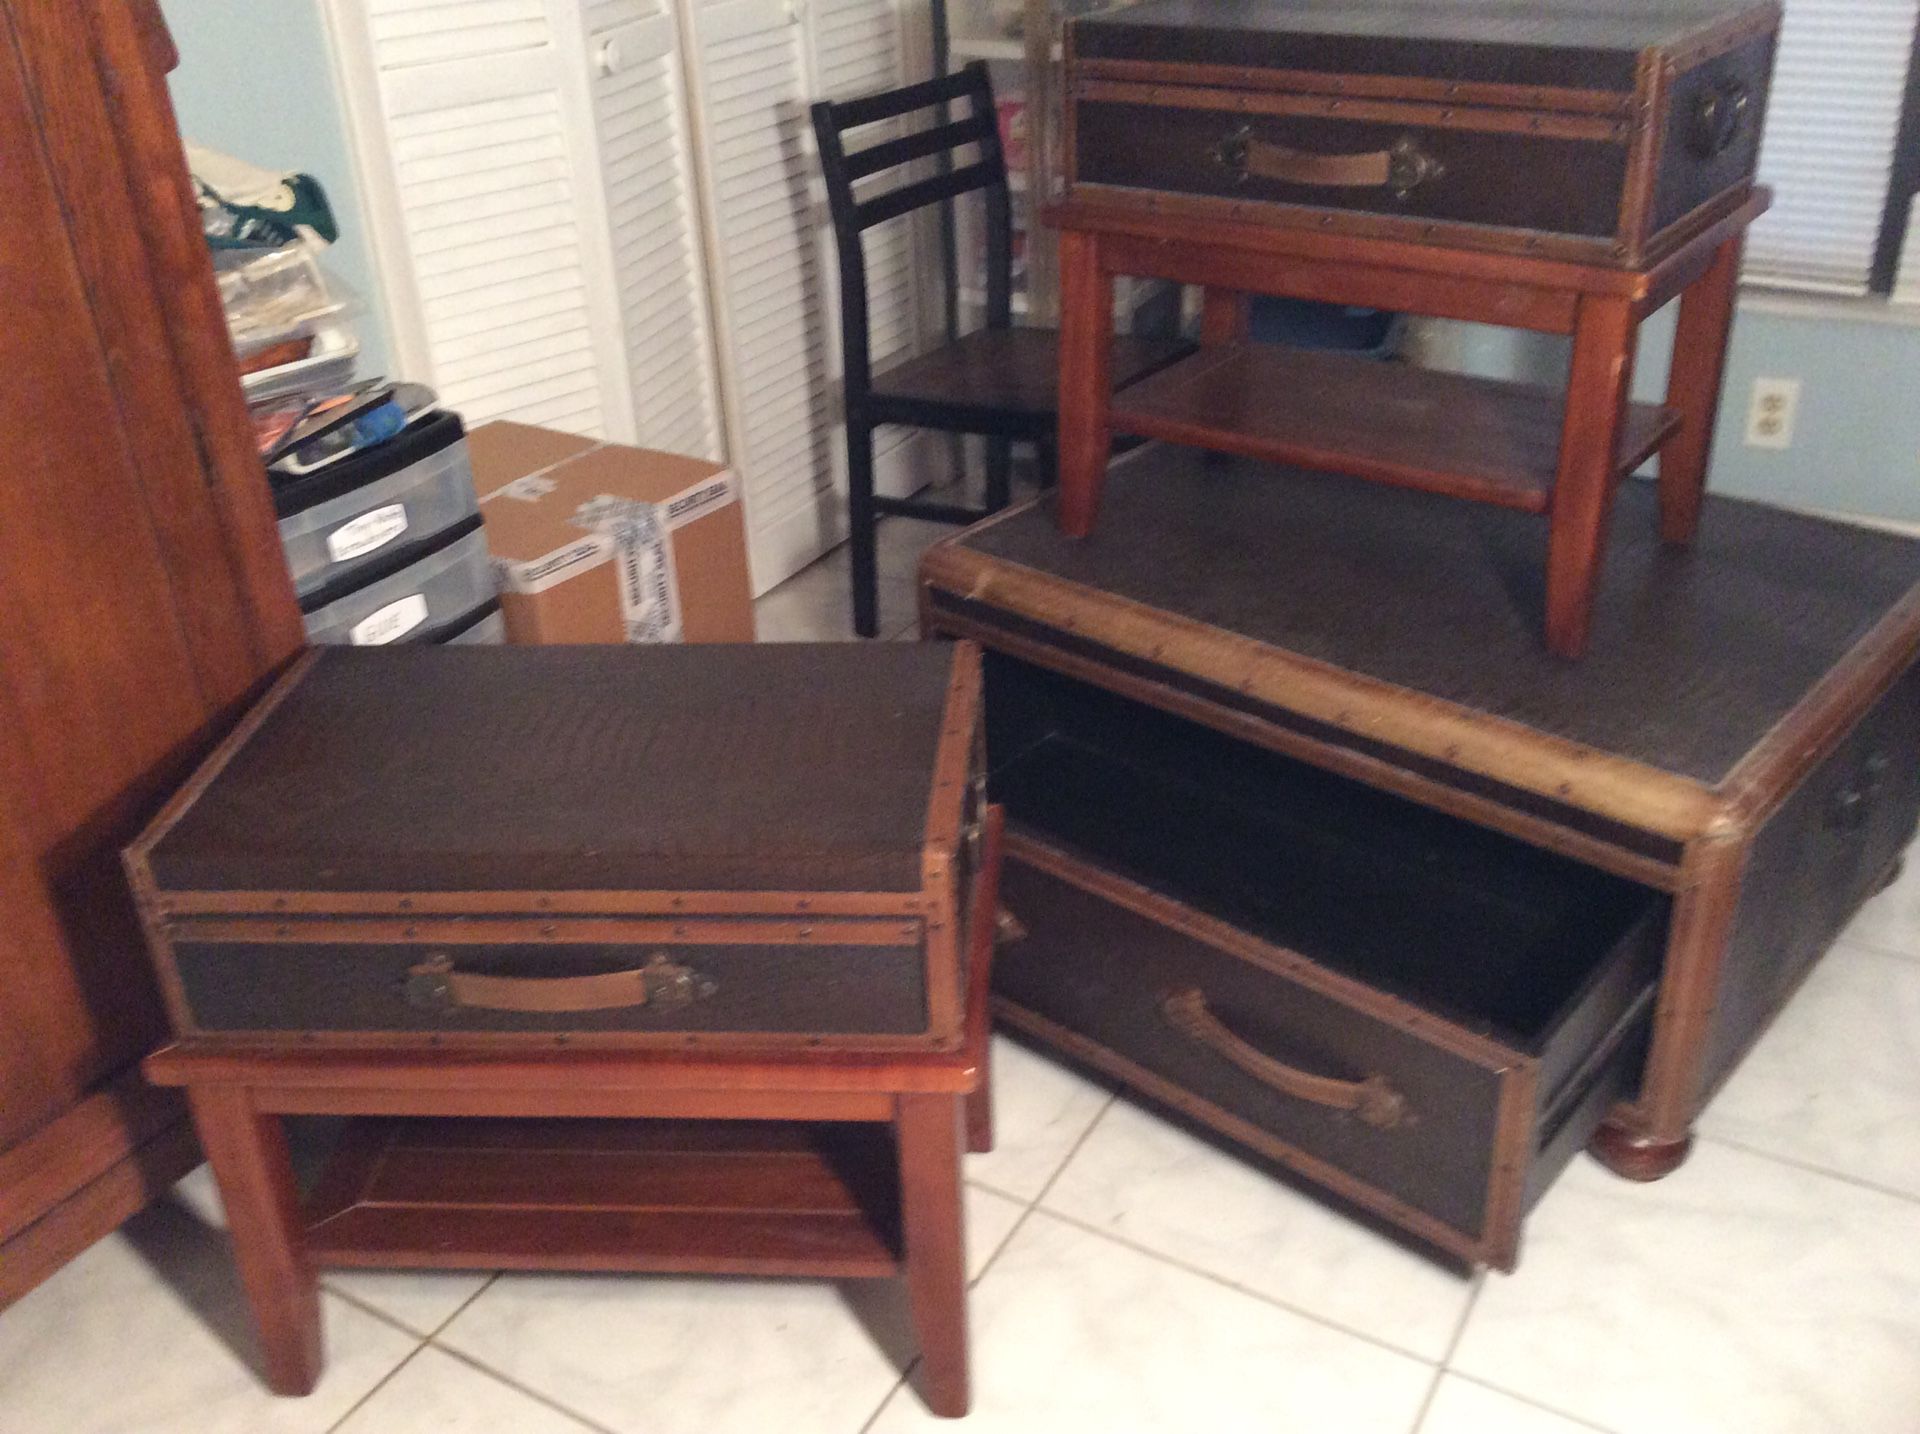 3 leather tables with storage